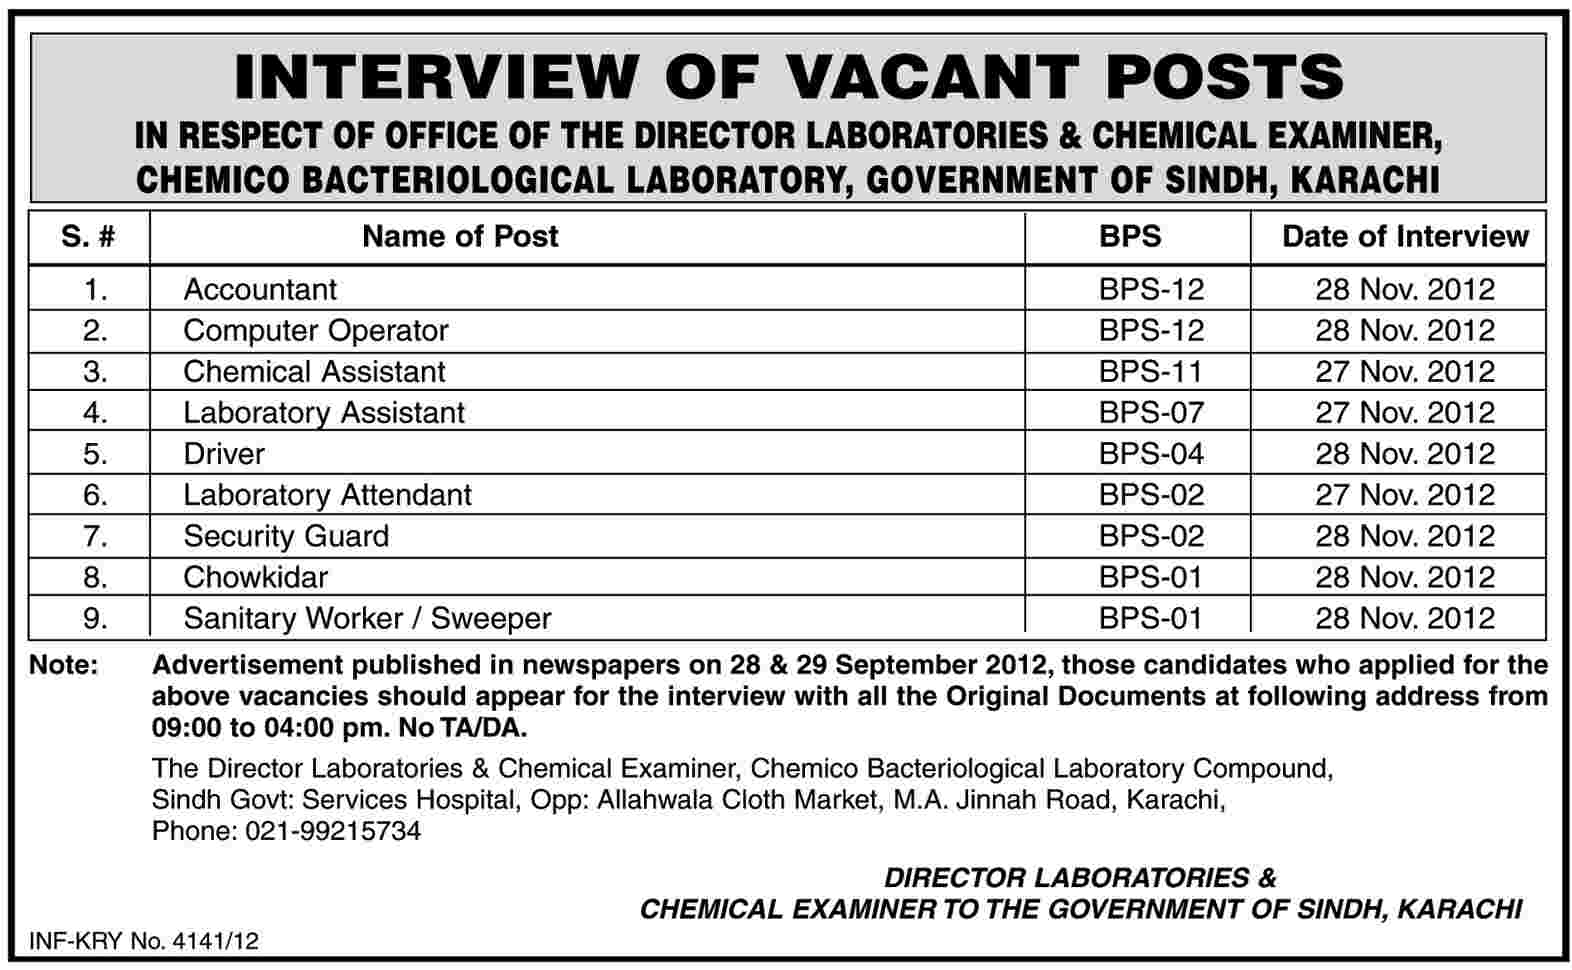 Interview Call for Chemico Bacteriological Laboratory, Government of Sindh Jobs